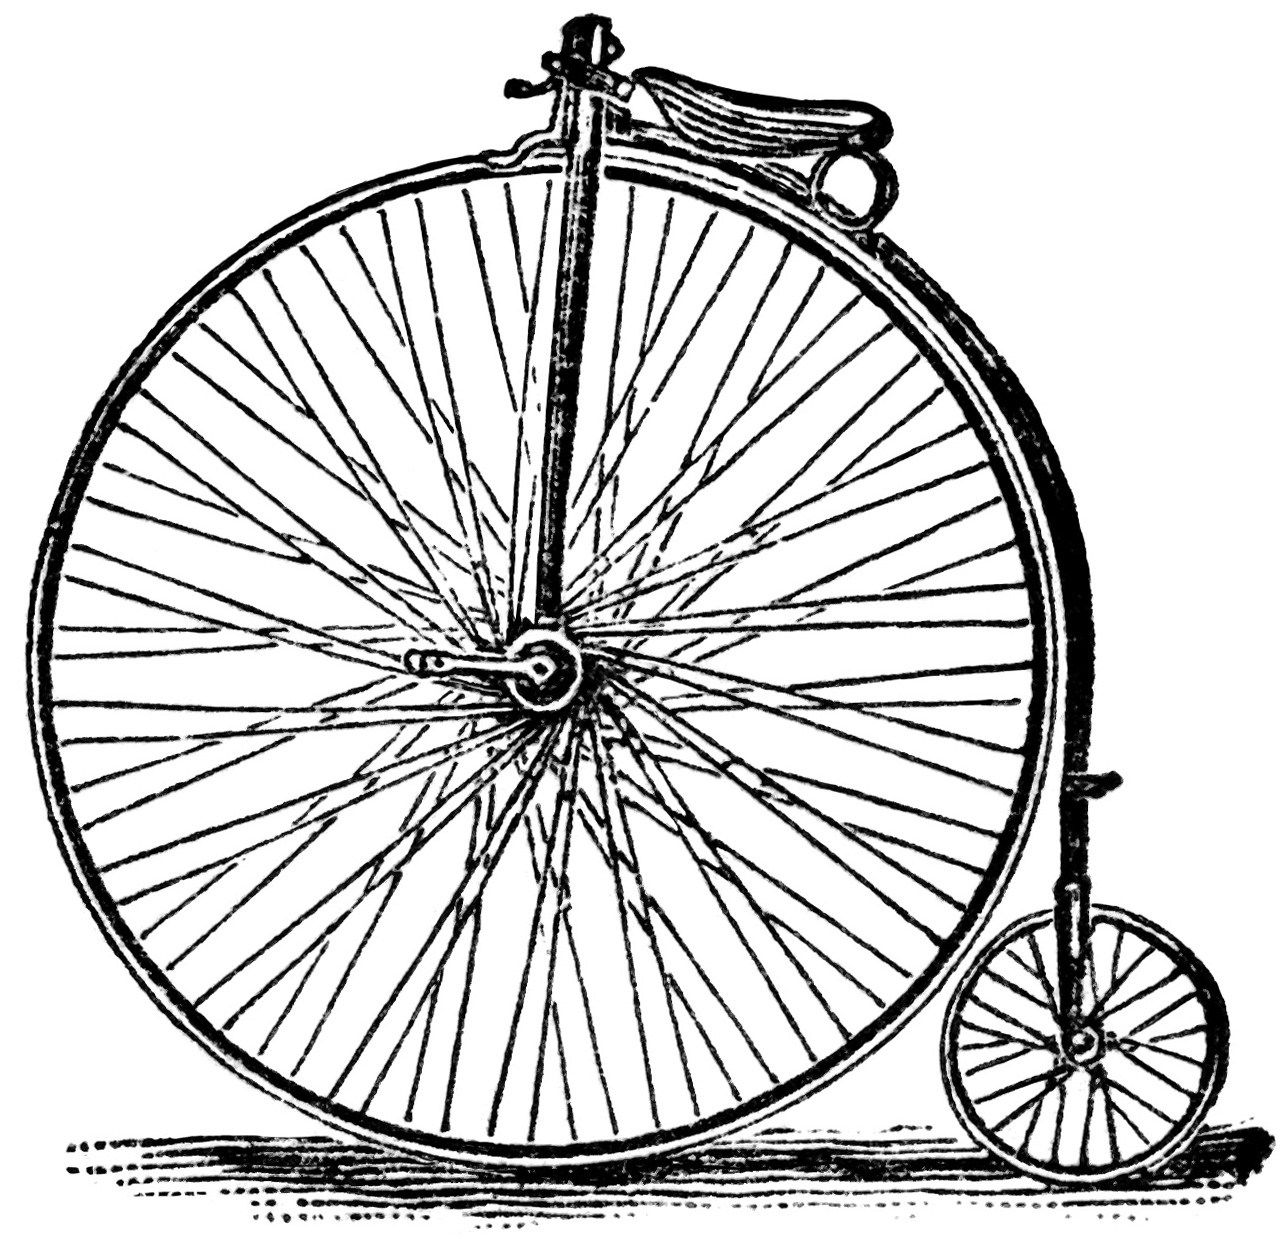 bicycle clipart illustrated